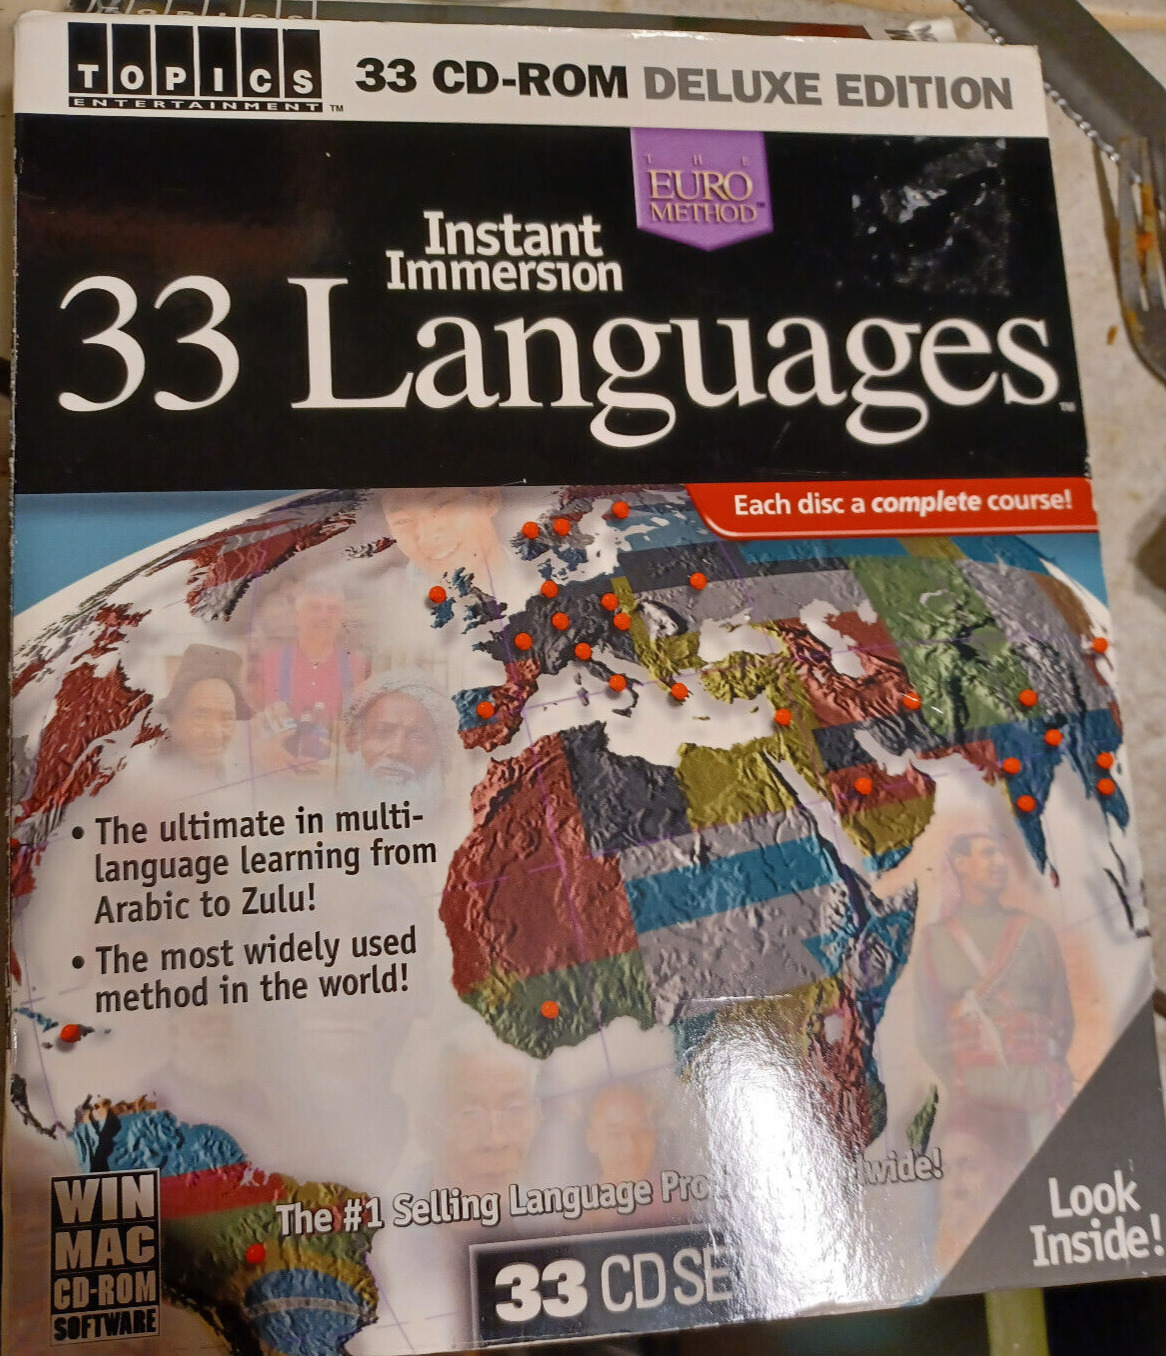 TOPICS Instant Immersion 33 Languages EURO Method 33 CD Set Deluxe Edition-Q